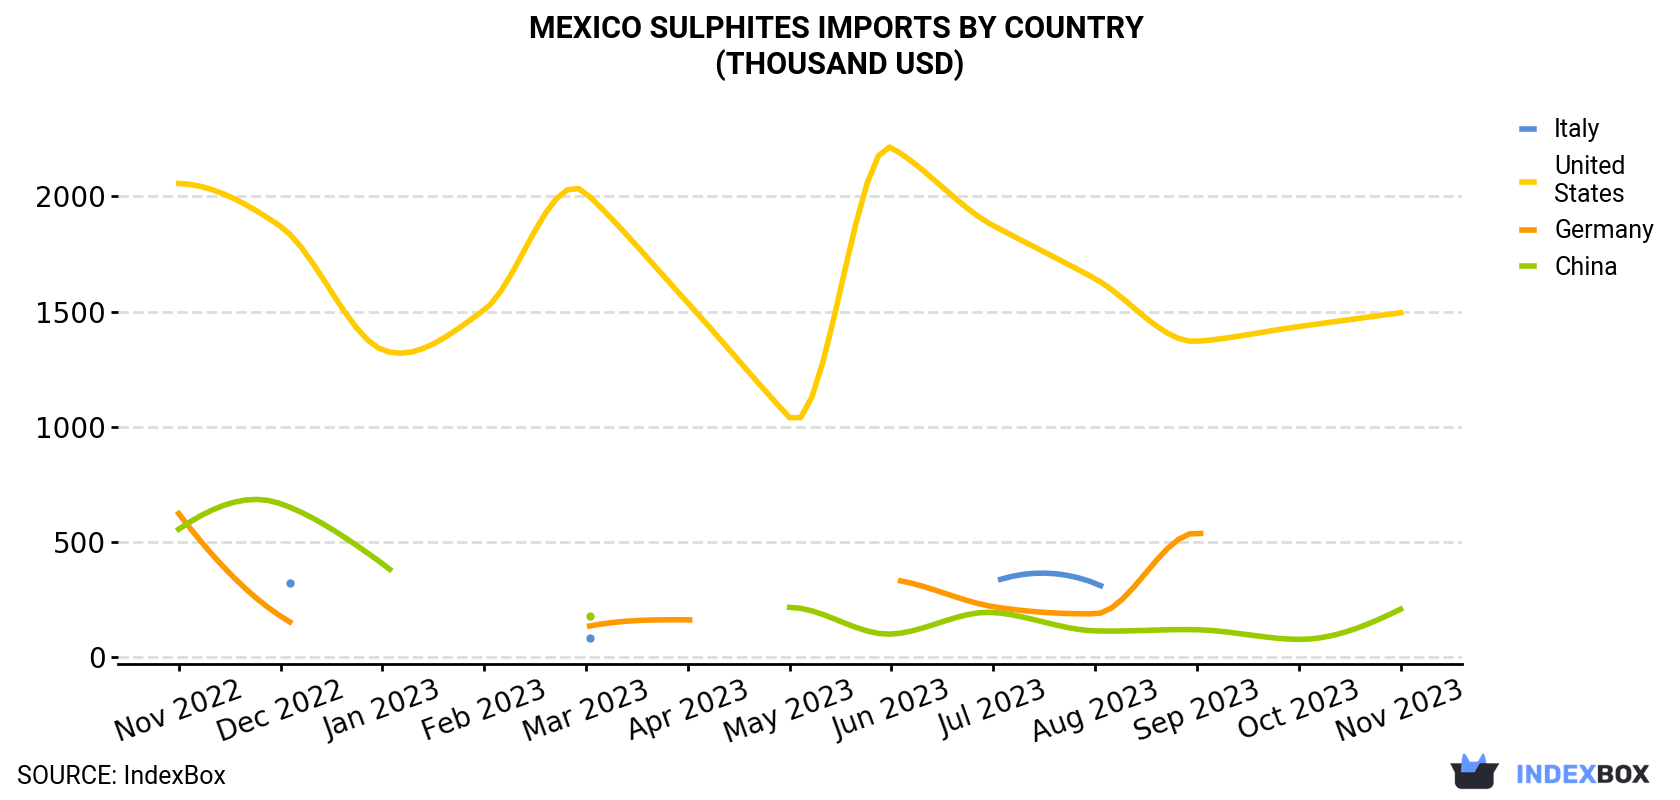 Mexico Sulphites Imports By Country (Thousand USD)